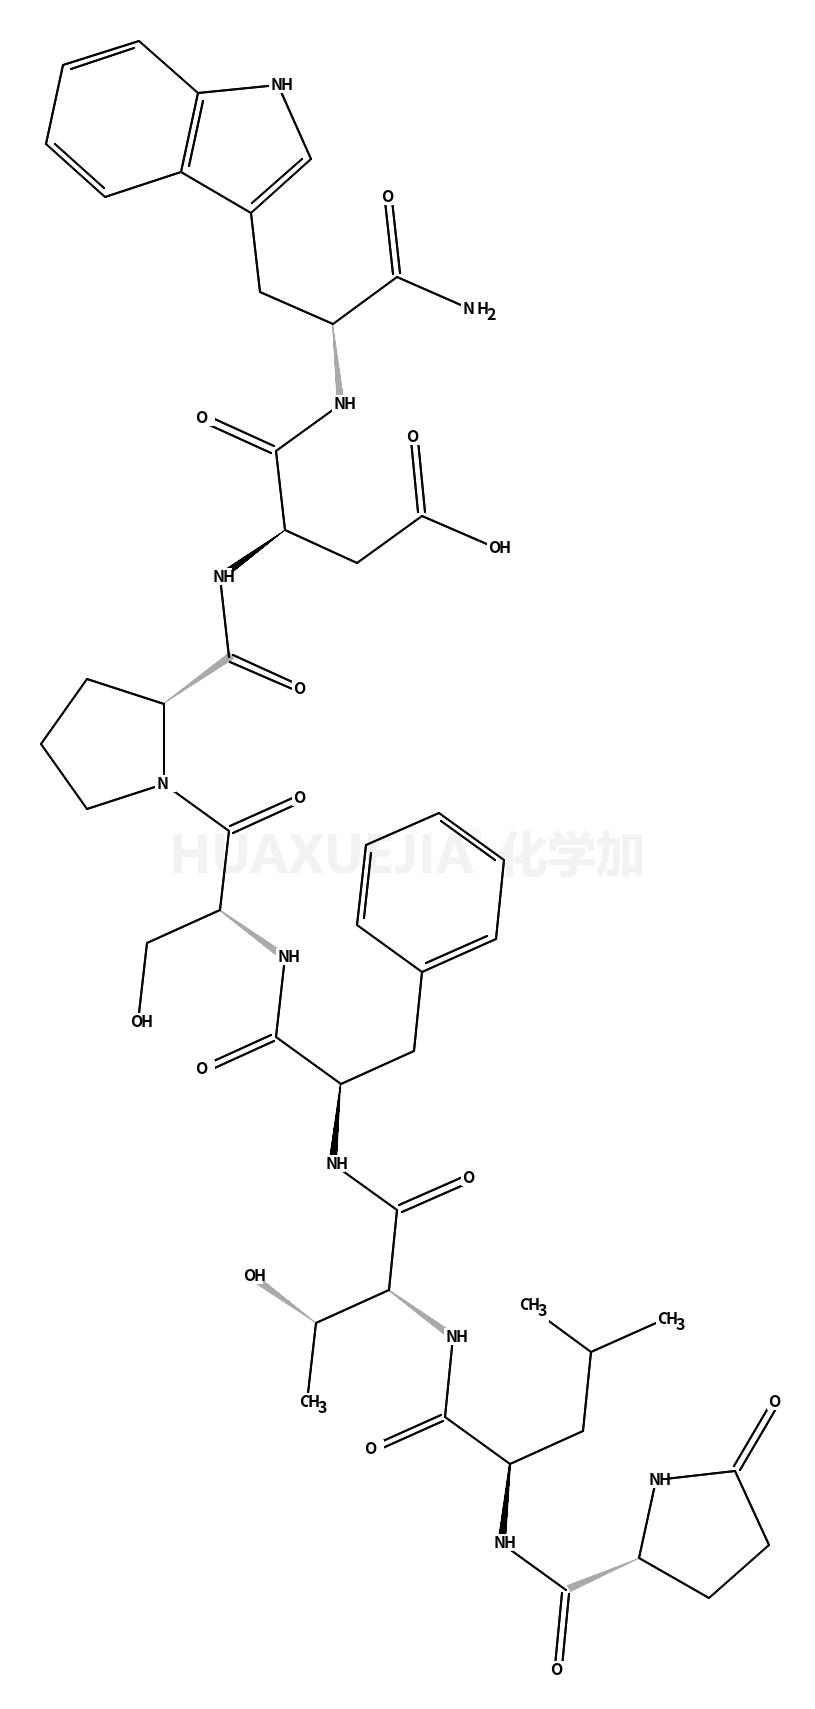 (3S)-4-[[(2S)-1-amino-3-(1H-indol-3-yl)-1-oxopropan-2-yl]amino]-3-[[(2S)-1-[(2S)-3-hydroxy-2-[[(2S)-2-[[(2S,3R)-3-hydroxy-2-[[(2S)-4-methyl-2-[[(2S)-5-oxopyrrolidine-2-carbonyl]amino]pentanoyl]amino]butanoyl]amino]-3-phenylpropanoyl]amino]propanoyl]pyrrol